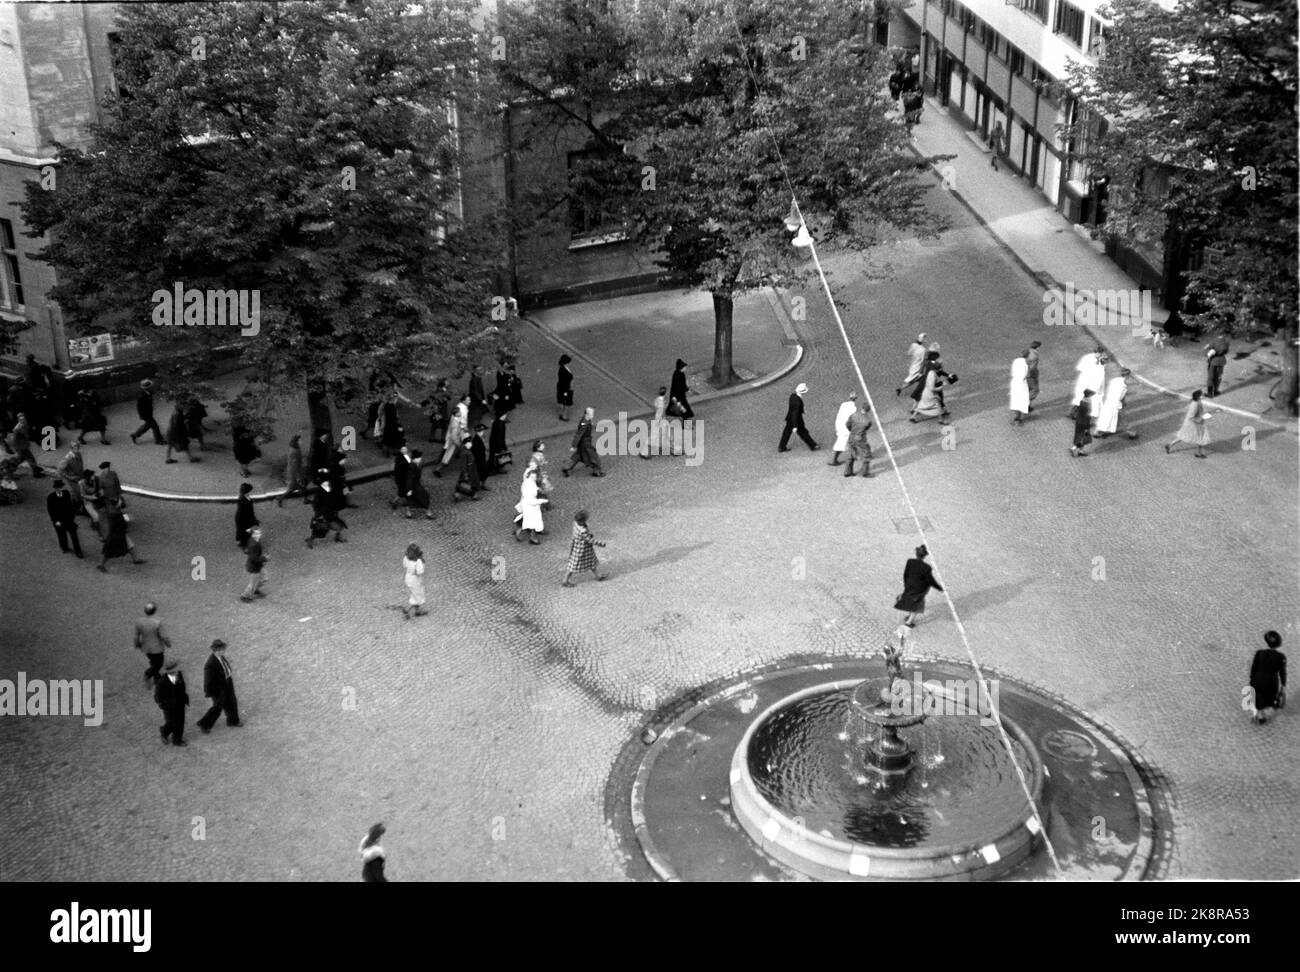 Oslo September 1941 Oslo during World War II: Flight Alarm, people hurry to shelters at St. Olavs Plass 1. Photo: NTB Stock Photo